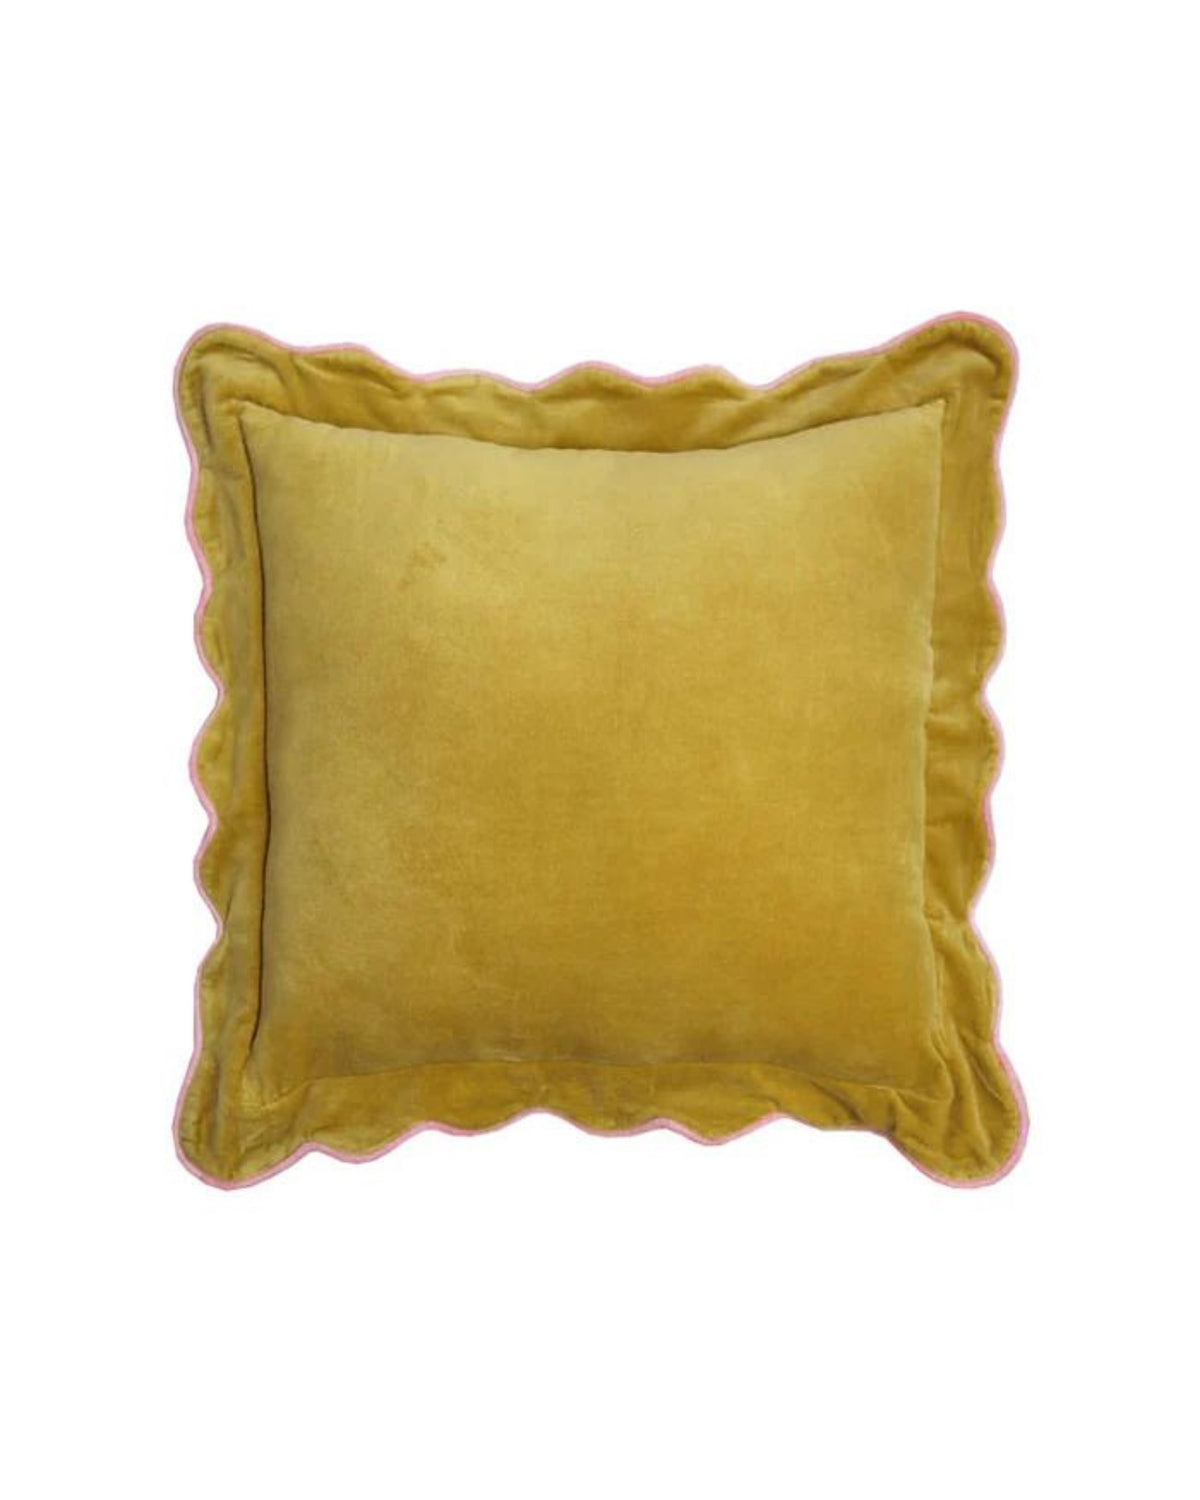 Add some colour and texture to your home with the Velvet Scalloped Cushion in Tawny Olive/Mustard. This 45cm square cushion is made from 100% velvet cotton and features a 5cm scalloped flange with contrast peony pink piping.